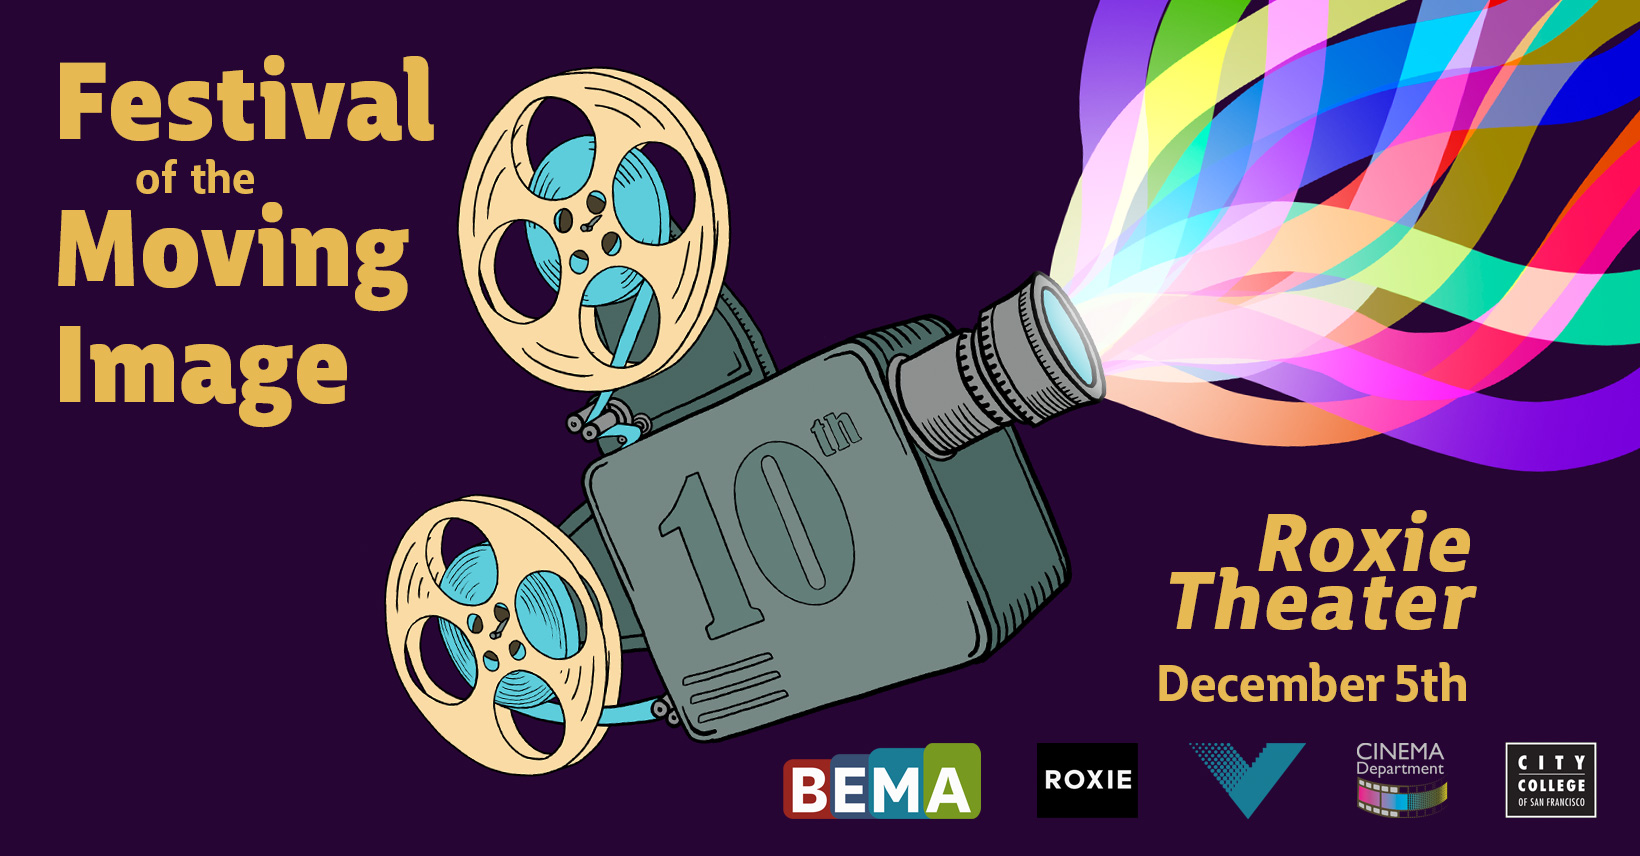 10th Annual Festival of the Moving Image